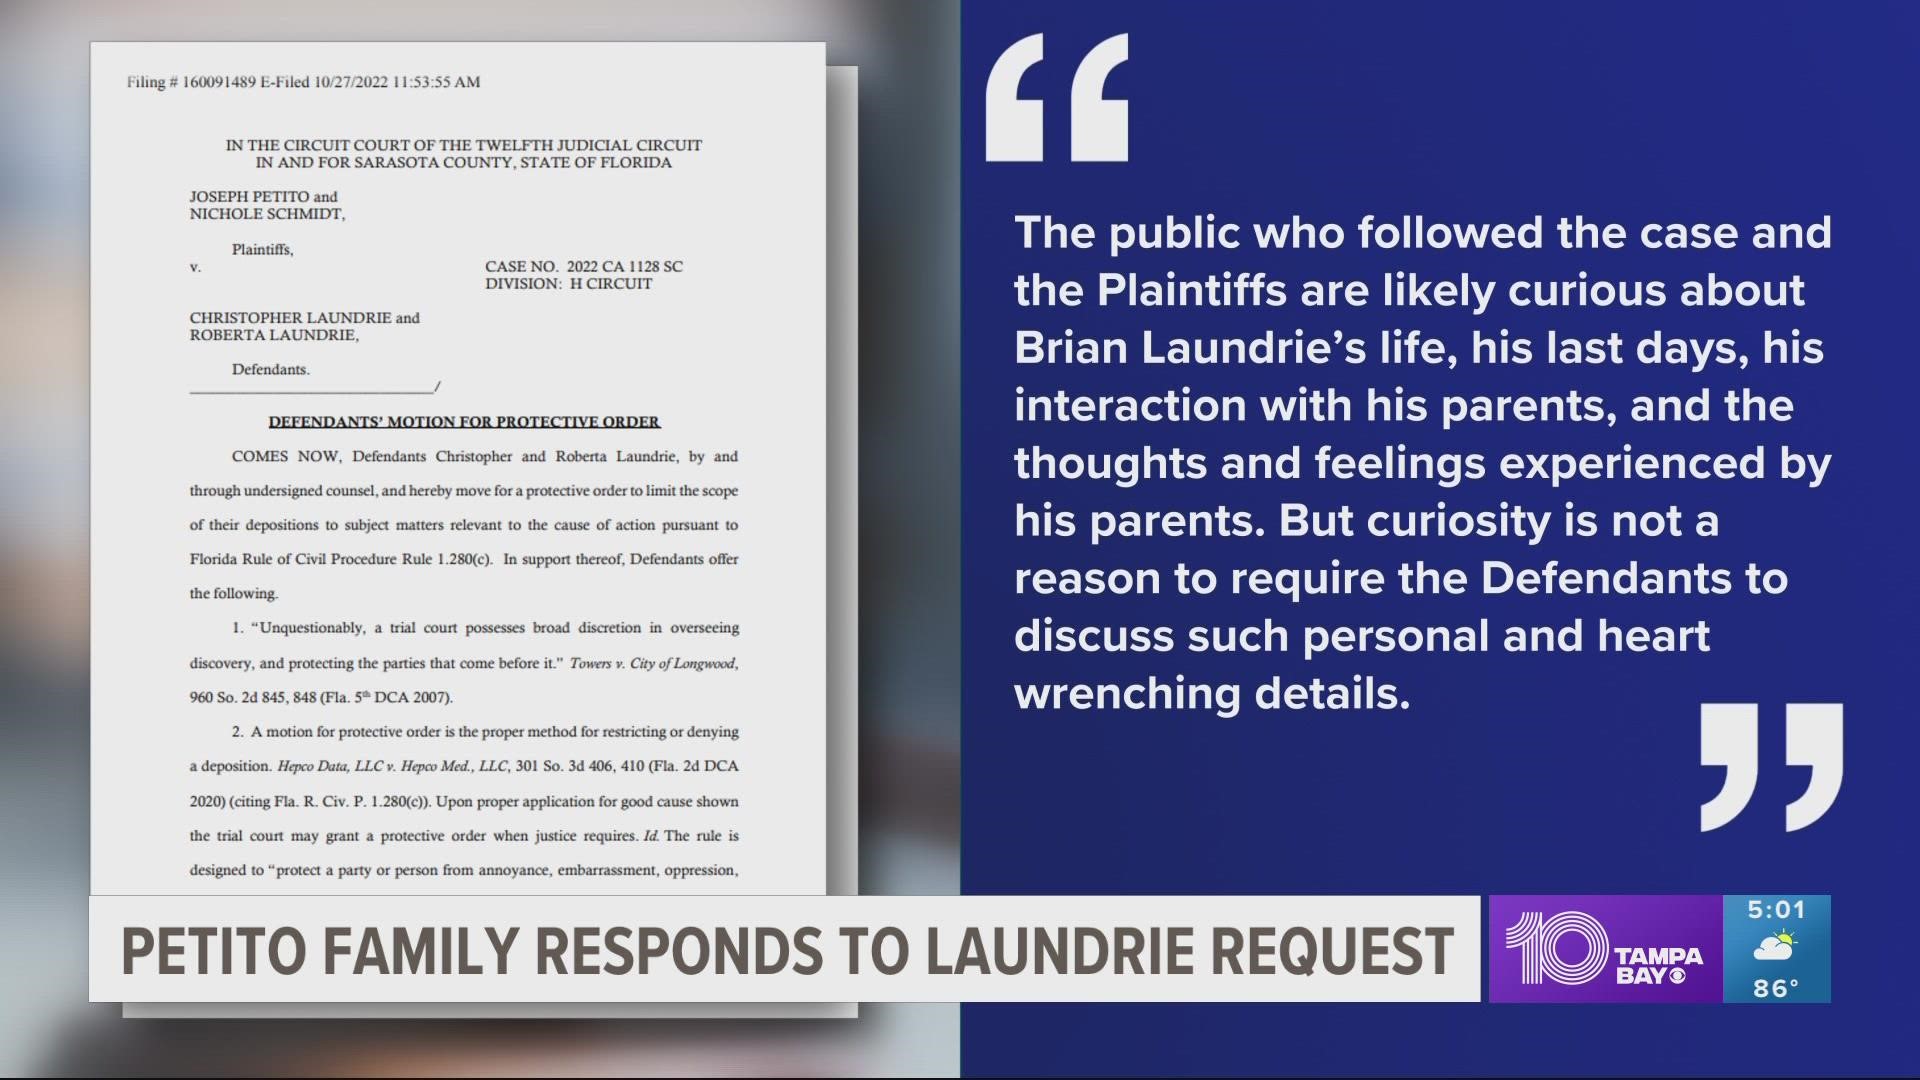 The attorney for Gabby Petito's parents called the motion filed premature and another example of the Laundrie family refusing to provide answers.